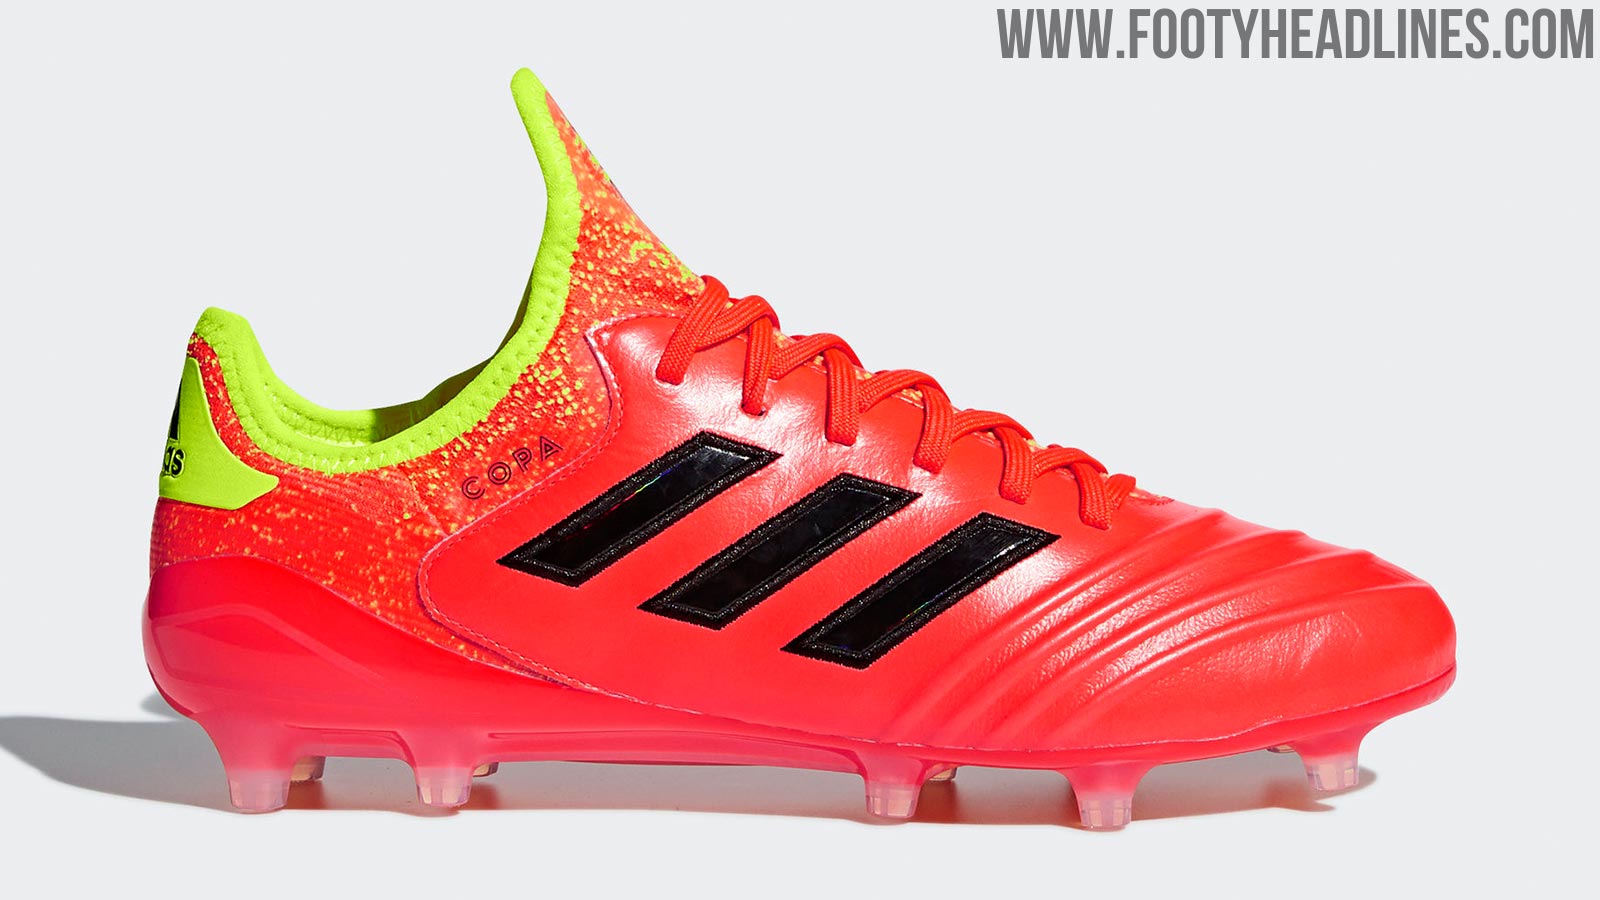 Abuso Correspondiente lente Energy Mode Adidas Copa 18 "World Cup" Boots Released - Footy Headlines